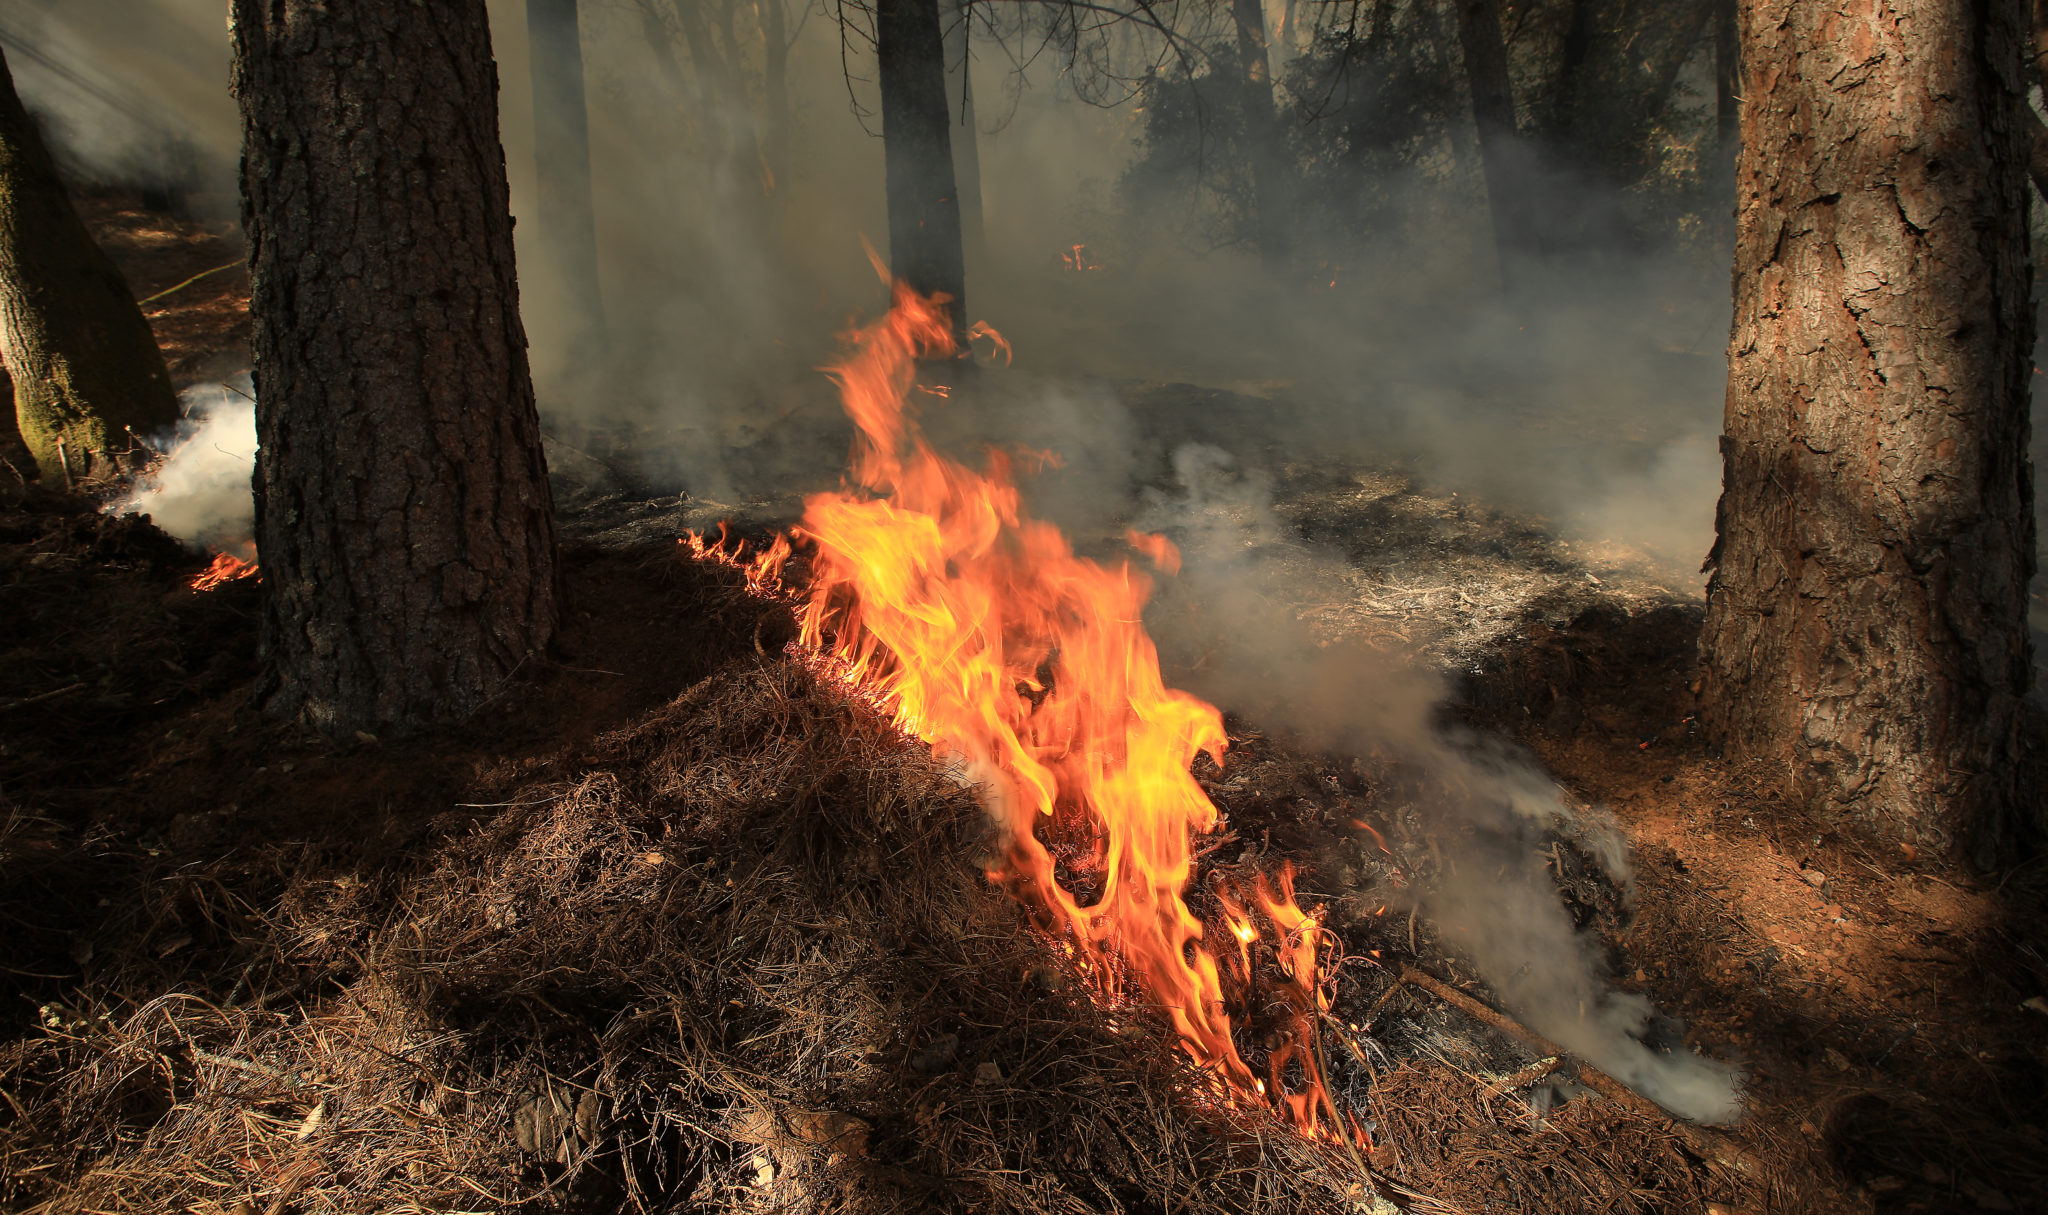 Flames chew through thick forest floor duff during a prescribed burn in the hills above West Dry Creek Nov. 29, 2020. The Walbridge fire burned very close to the area of the prescribed fire. (Kent Porter / The Press Democrat) 